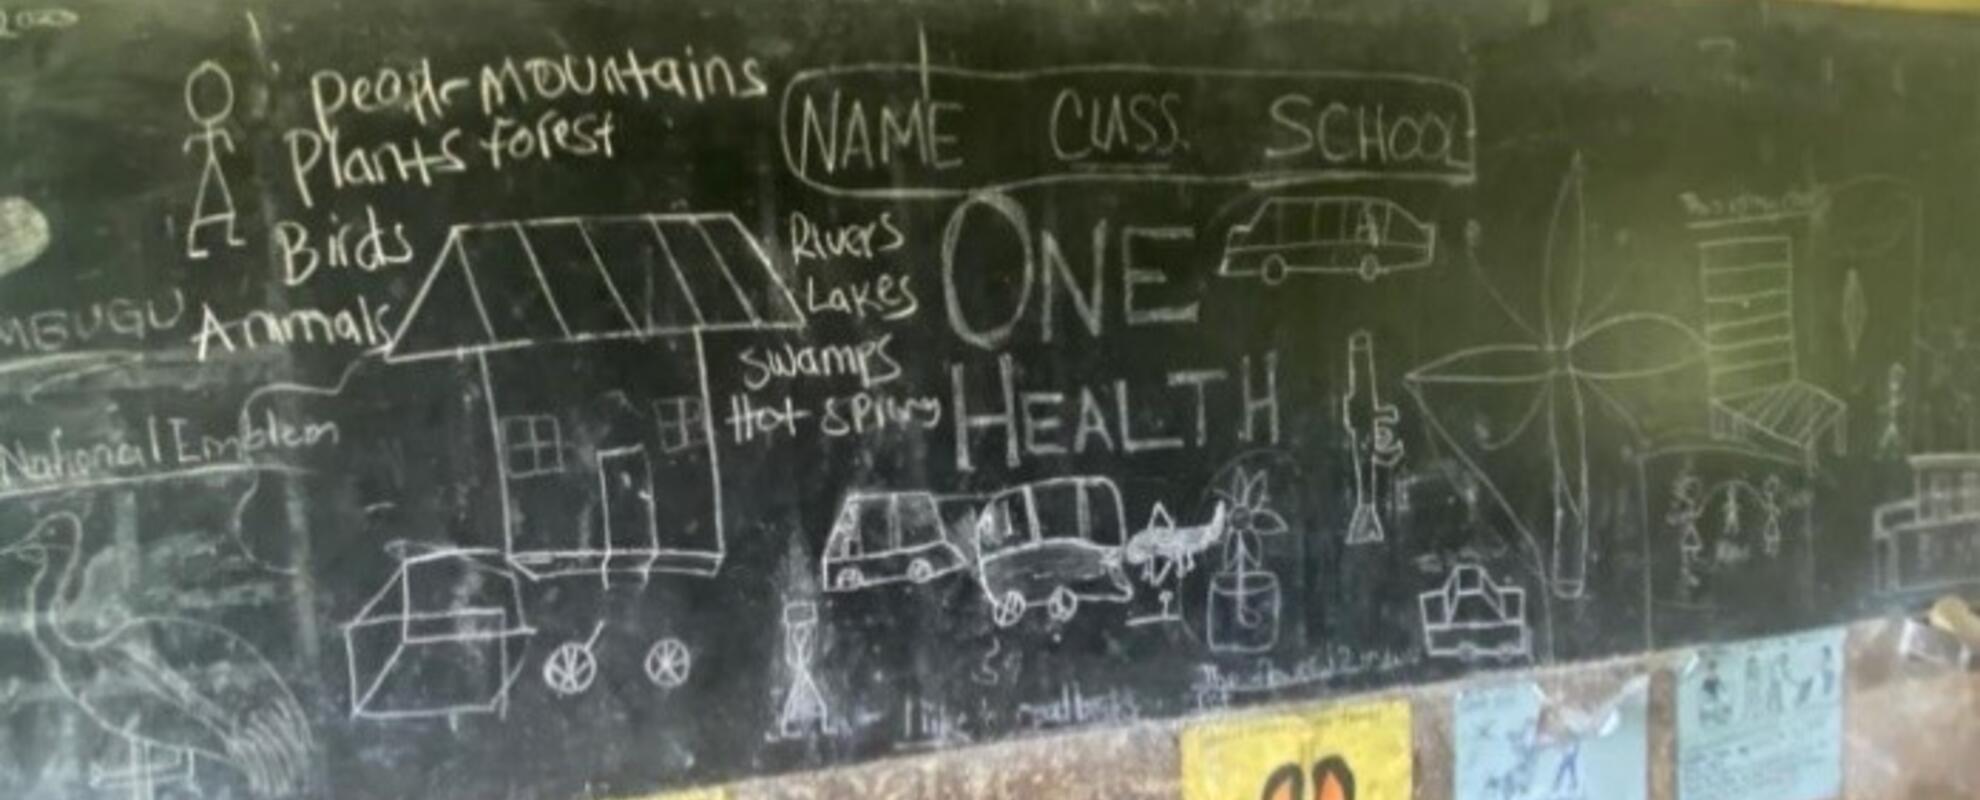 Illustration of the One Health approach by primary school pupils in Uganda (photo credit: COHESA/YOLIDA).